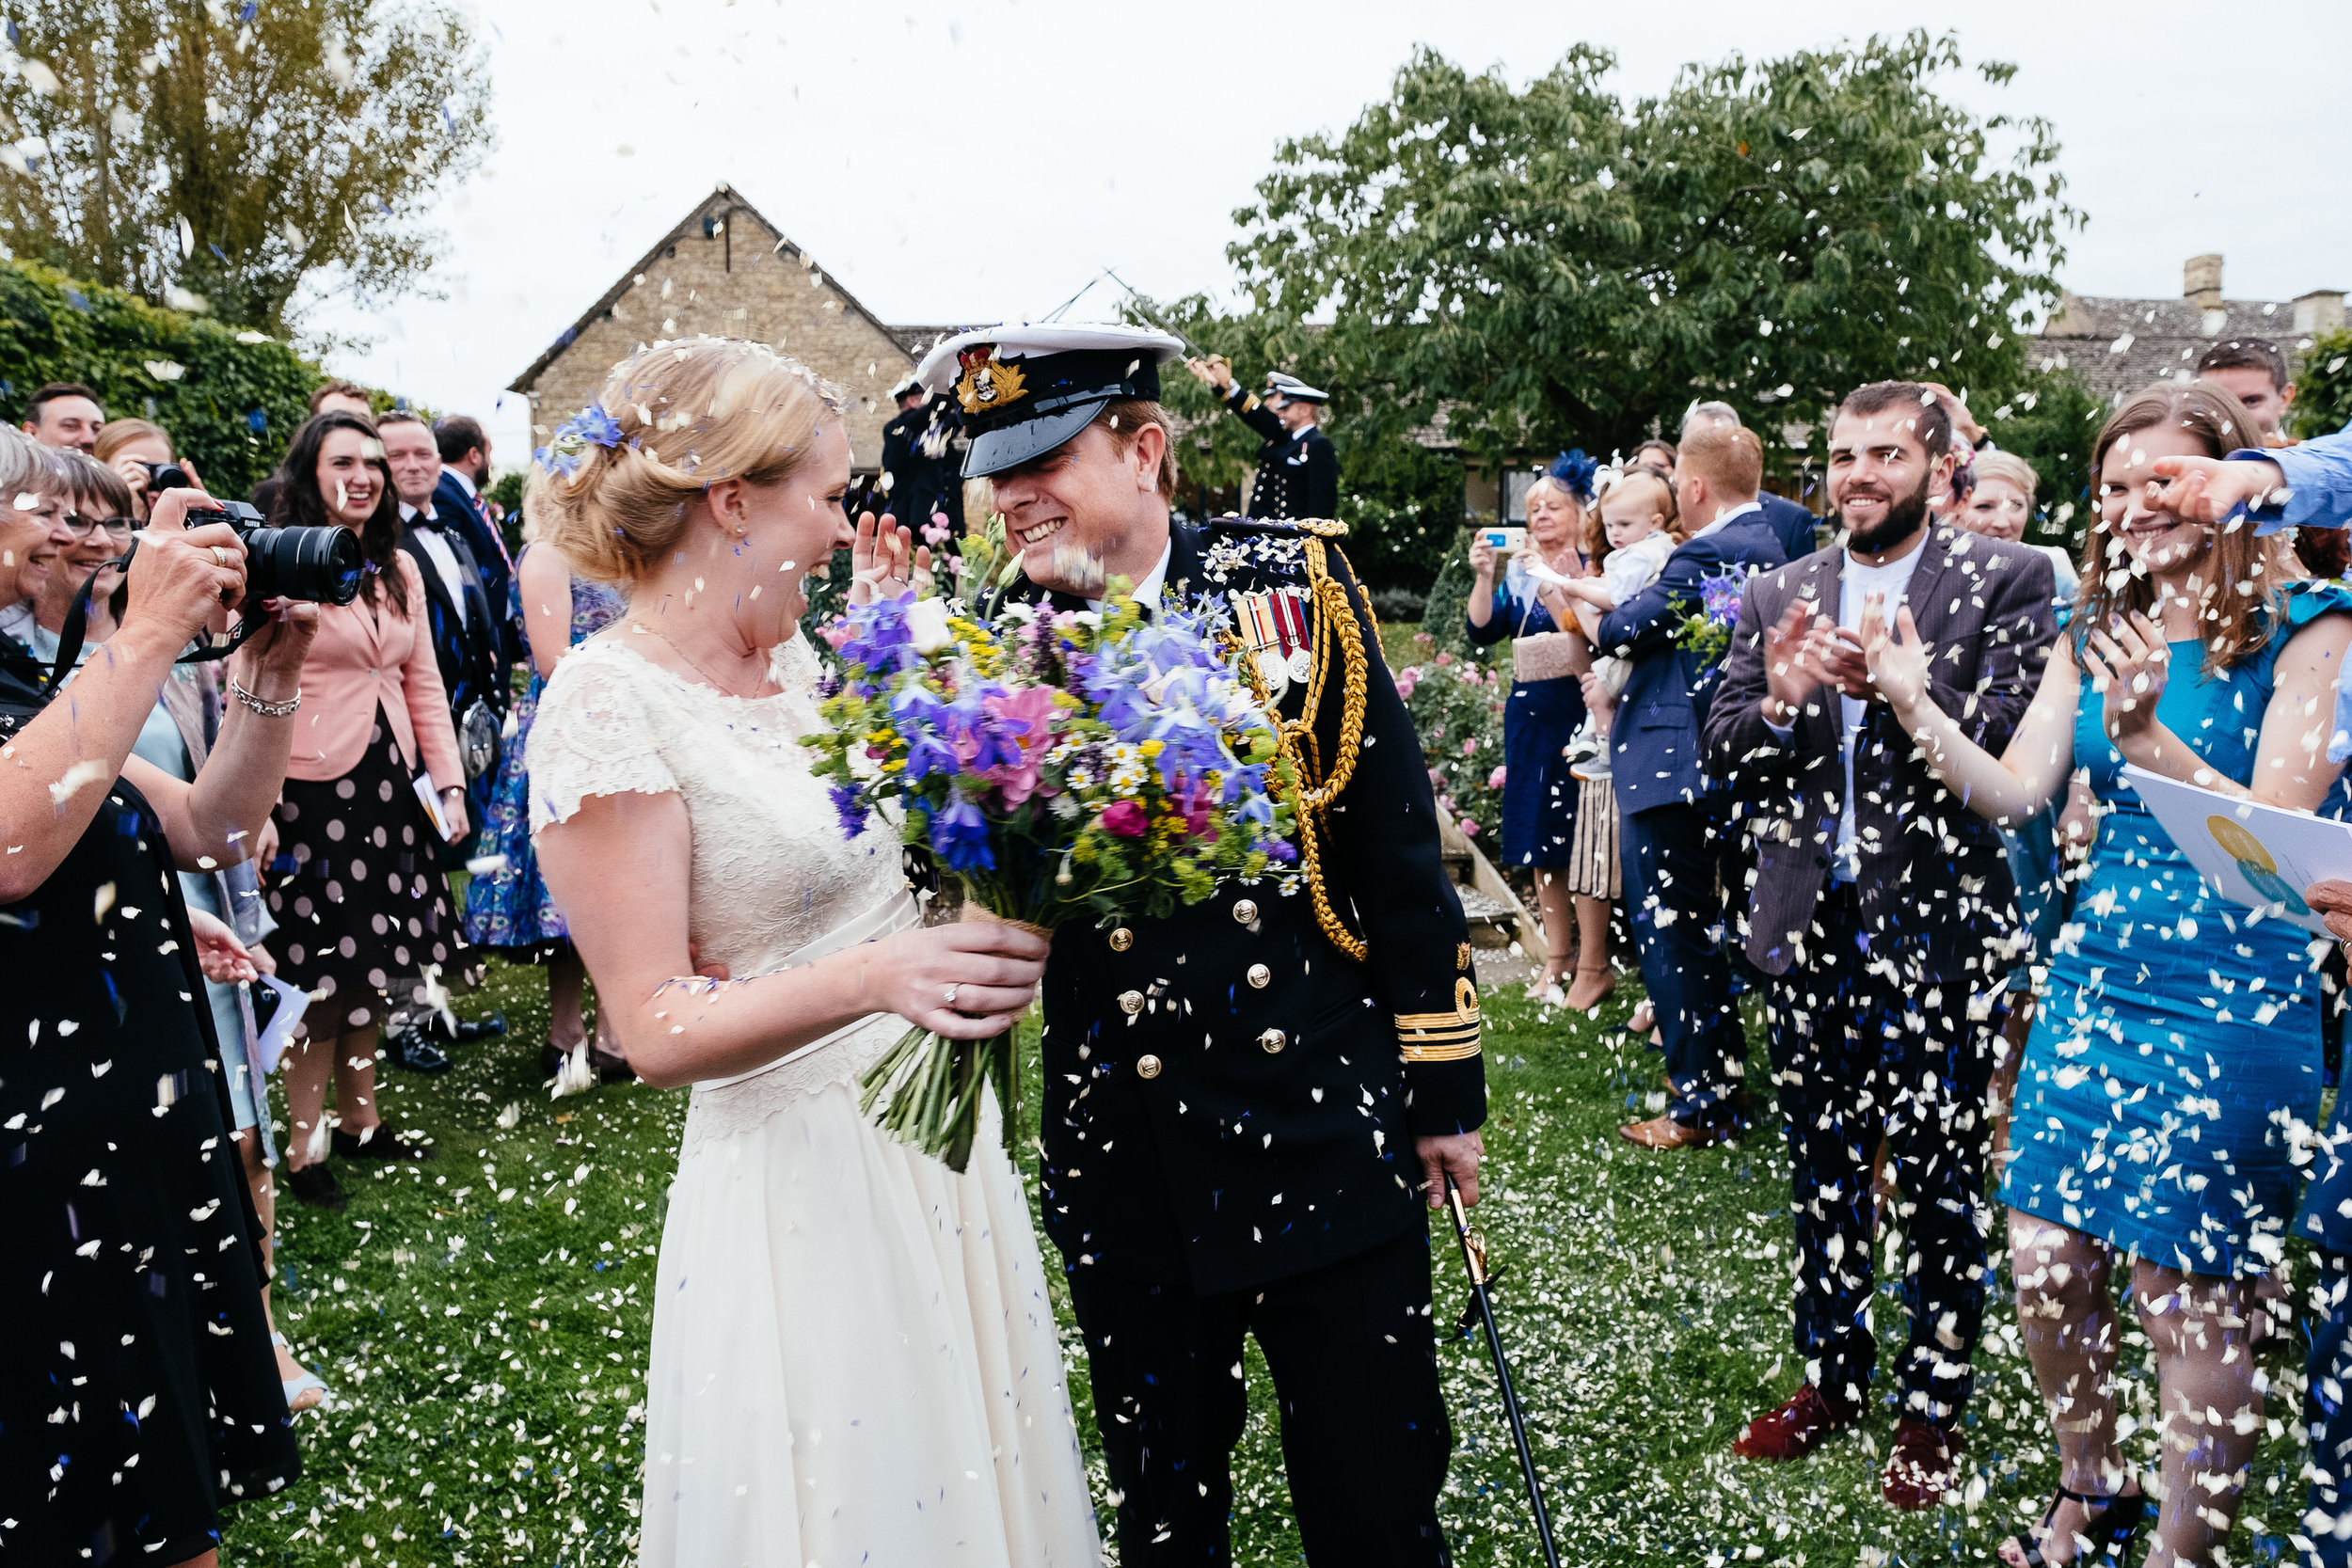 A bride and groom get covered in confetti at Merriscourt Wedding Venue, Oxfordshire